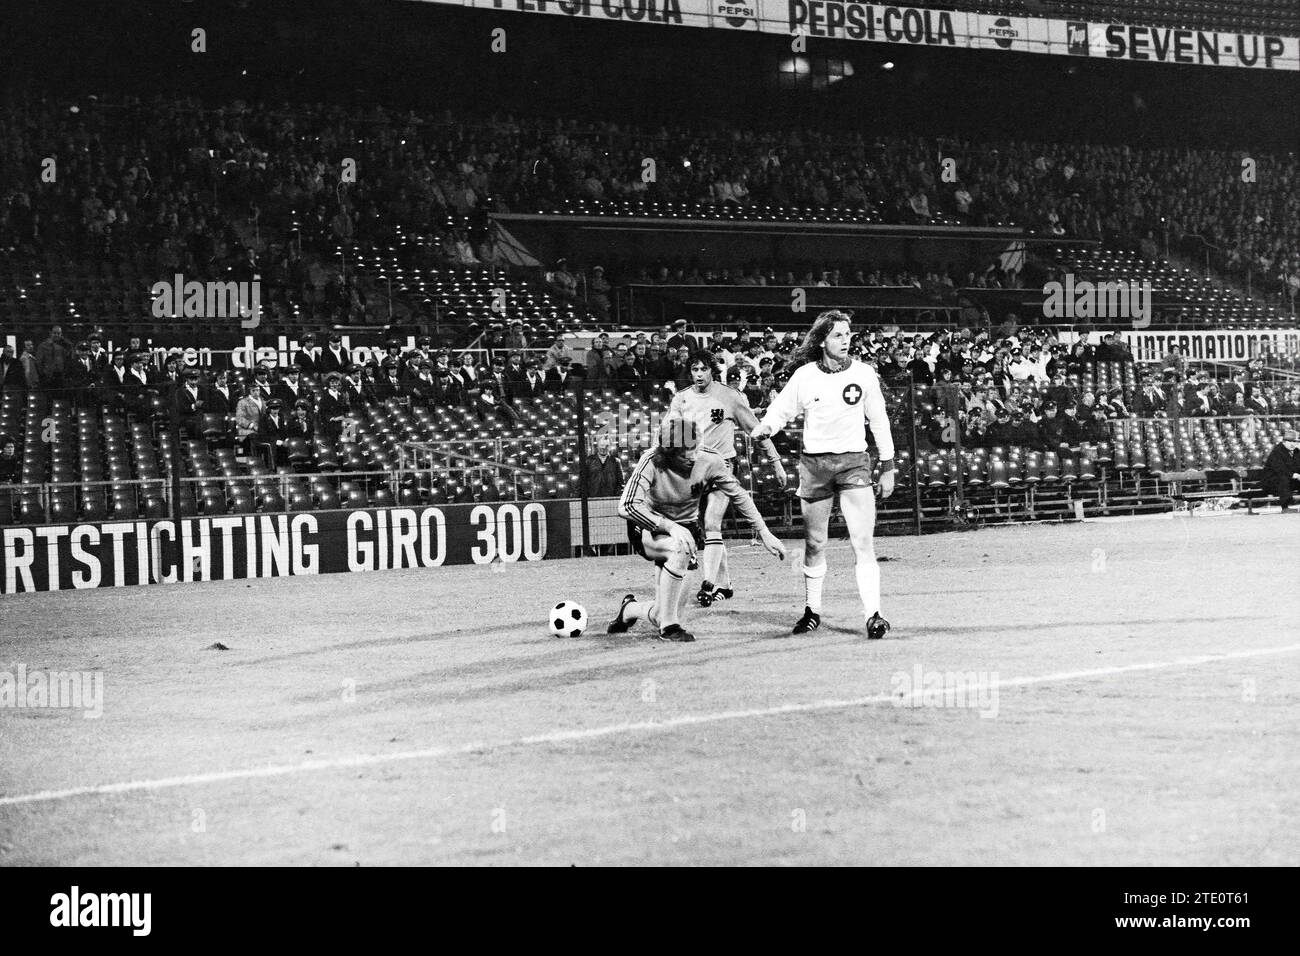 Netherlands - Switzerland, Football Netherlands, 09-10-1974, Whizgle News from the Past, Tailored for the Future. Explore historical narratives, Dutch The Netherlands agency image with a modern perspective, bridging the gap between yesterday's events and tomorrow's insights. A timeless journey shaping the stories that shape our future. Stock Photo